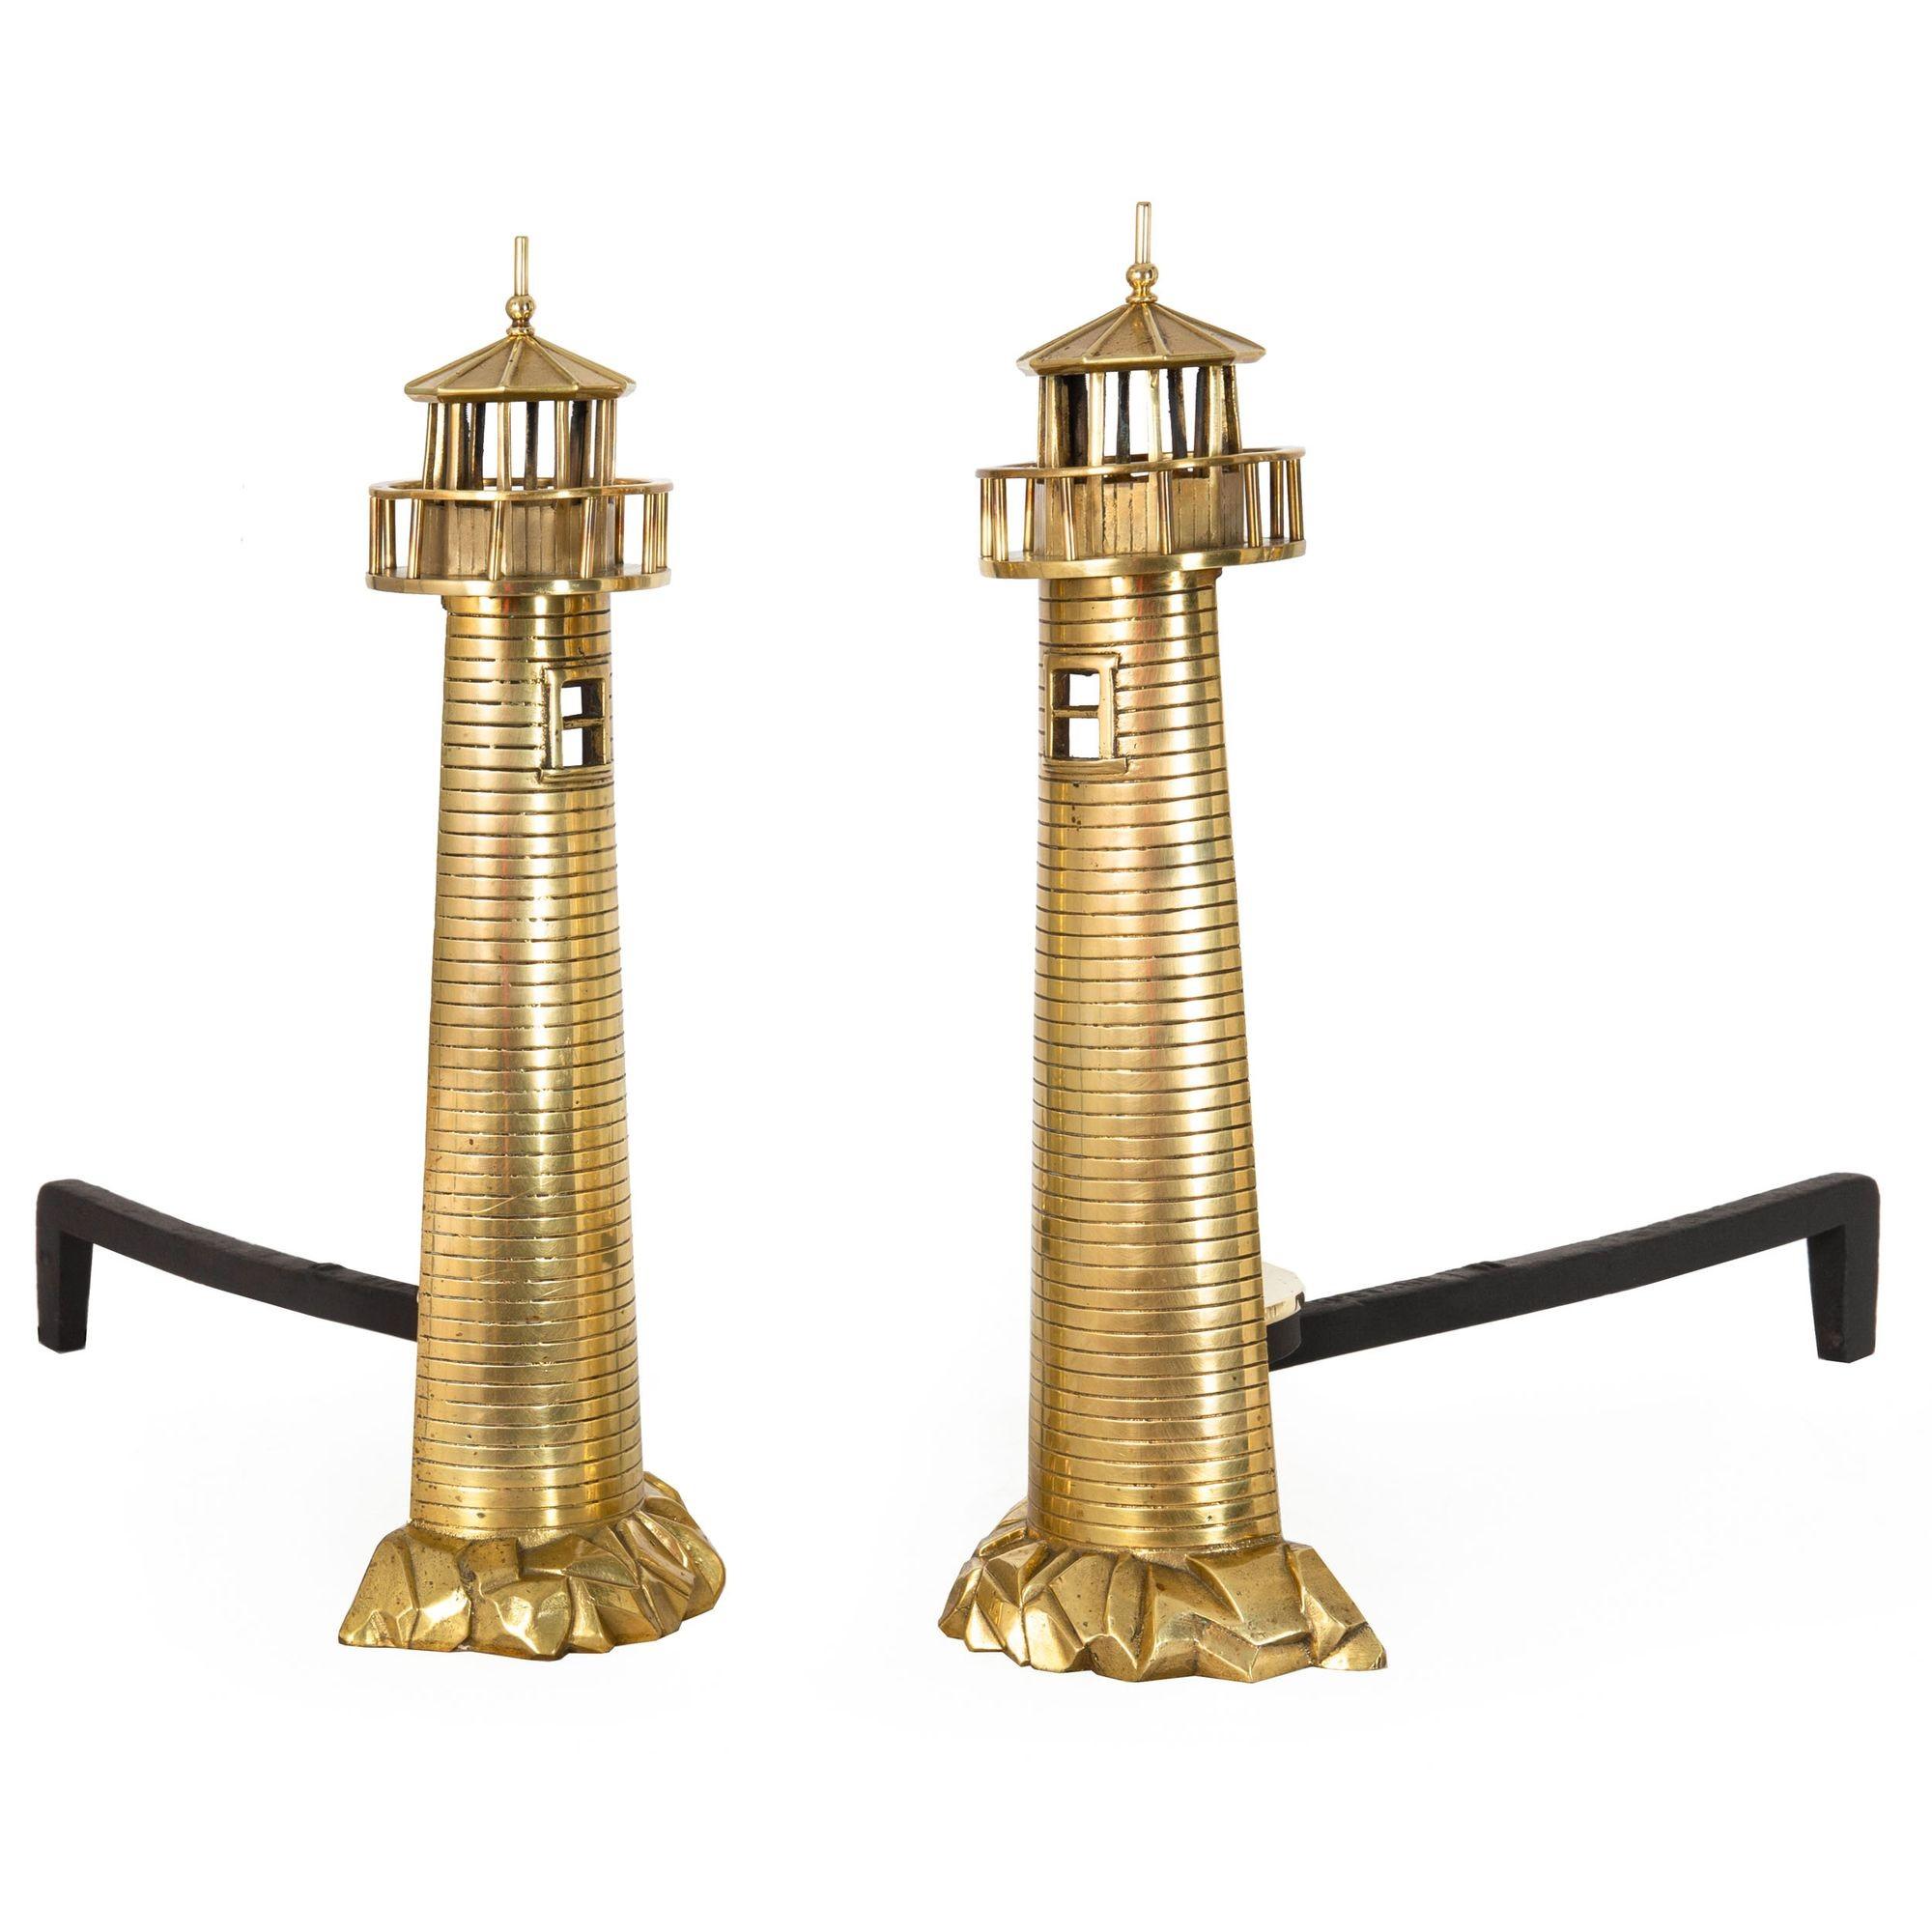 UNUSUAL PAIR OF LIGHTHOUSE-FORM BRASS LOG STOP ANDIRONS
By Rostand Manufacturing Company of Milford, Connecticut  made circa early 20th century  marked on log hogs 